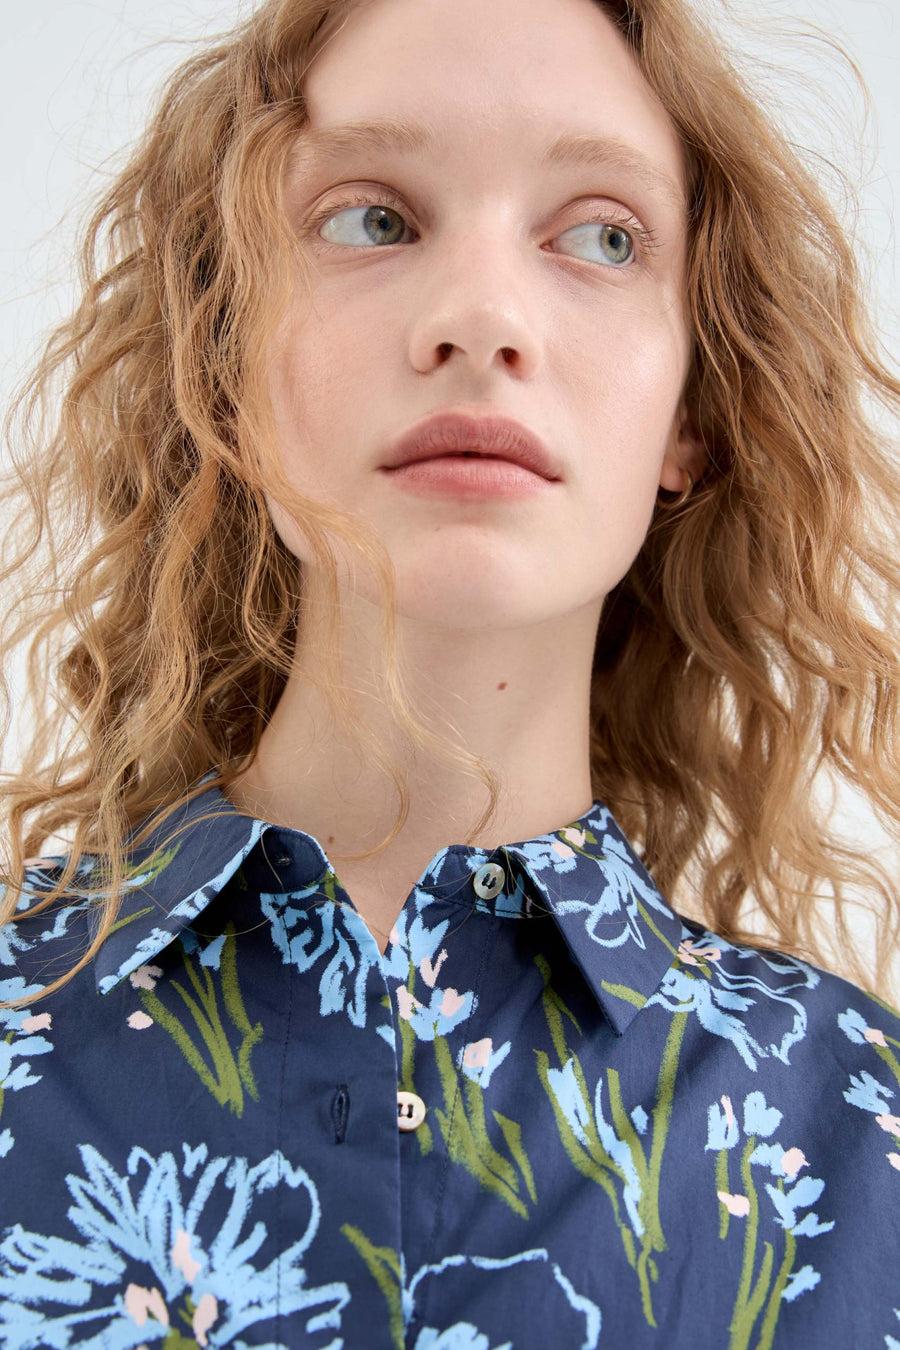 Oversized Poplin Shirt with Blue Floral Print